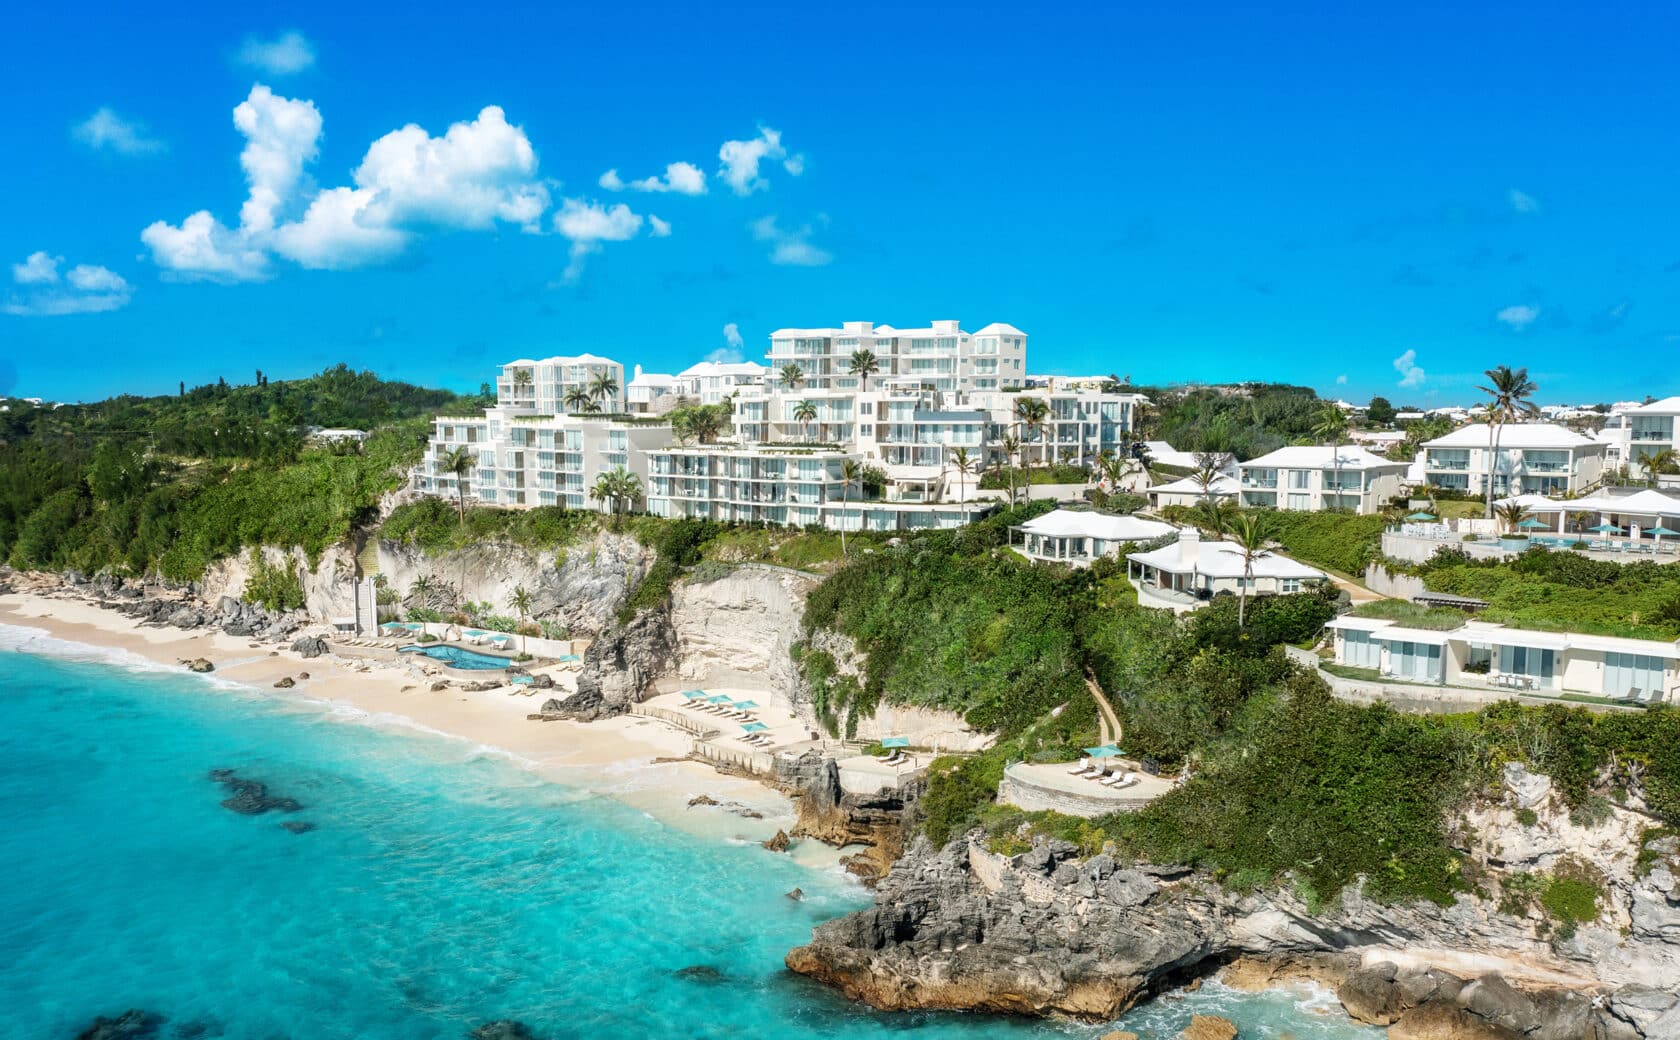 Aerial view of a luxurious coastal resort with white buildings perched on rocky cliffs above a turquoise sea, surrounded by lush greenery and a sandy beach.